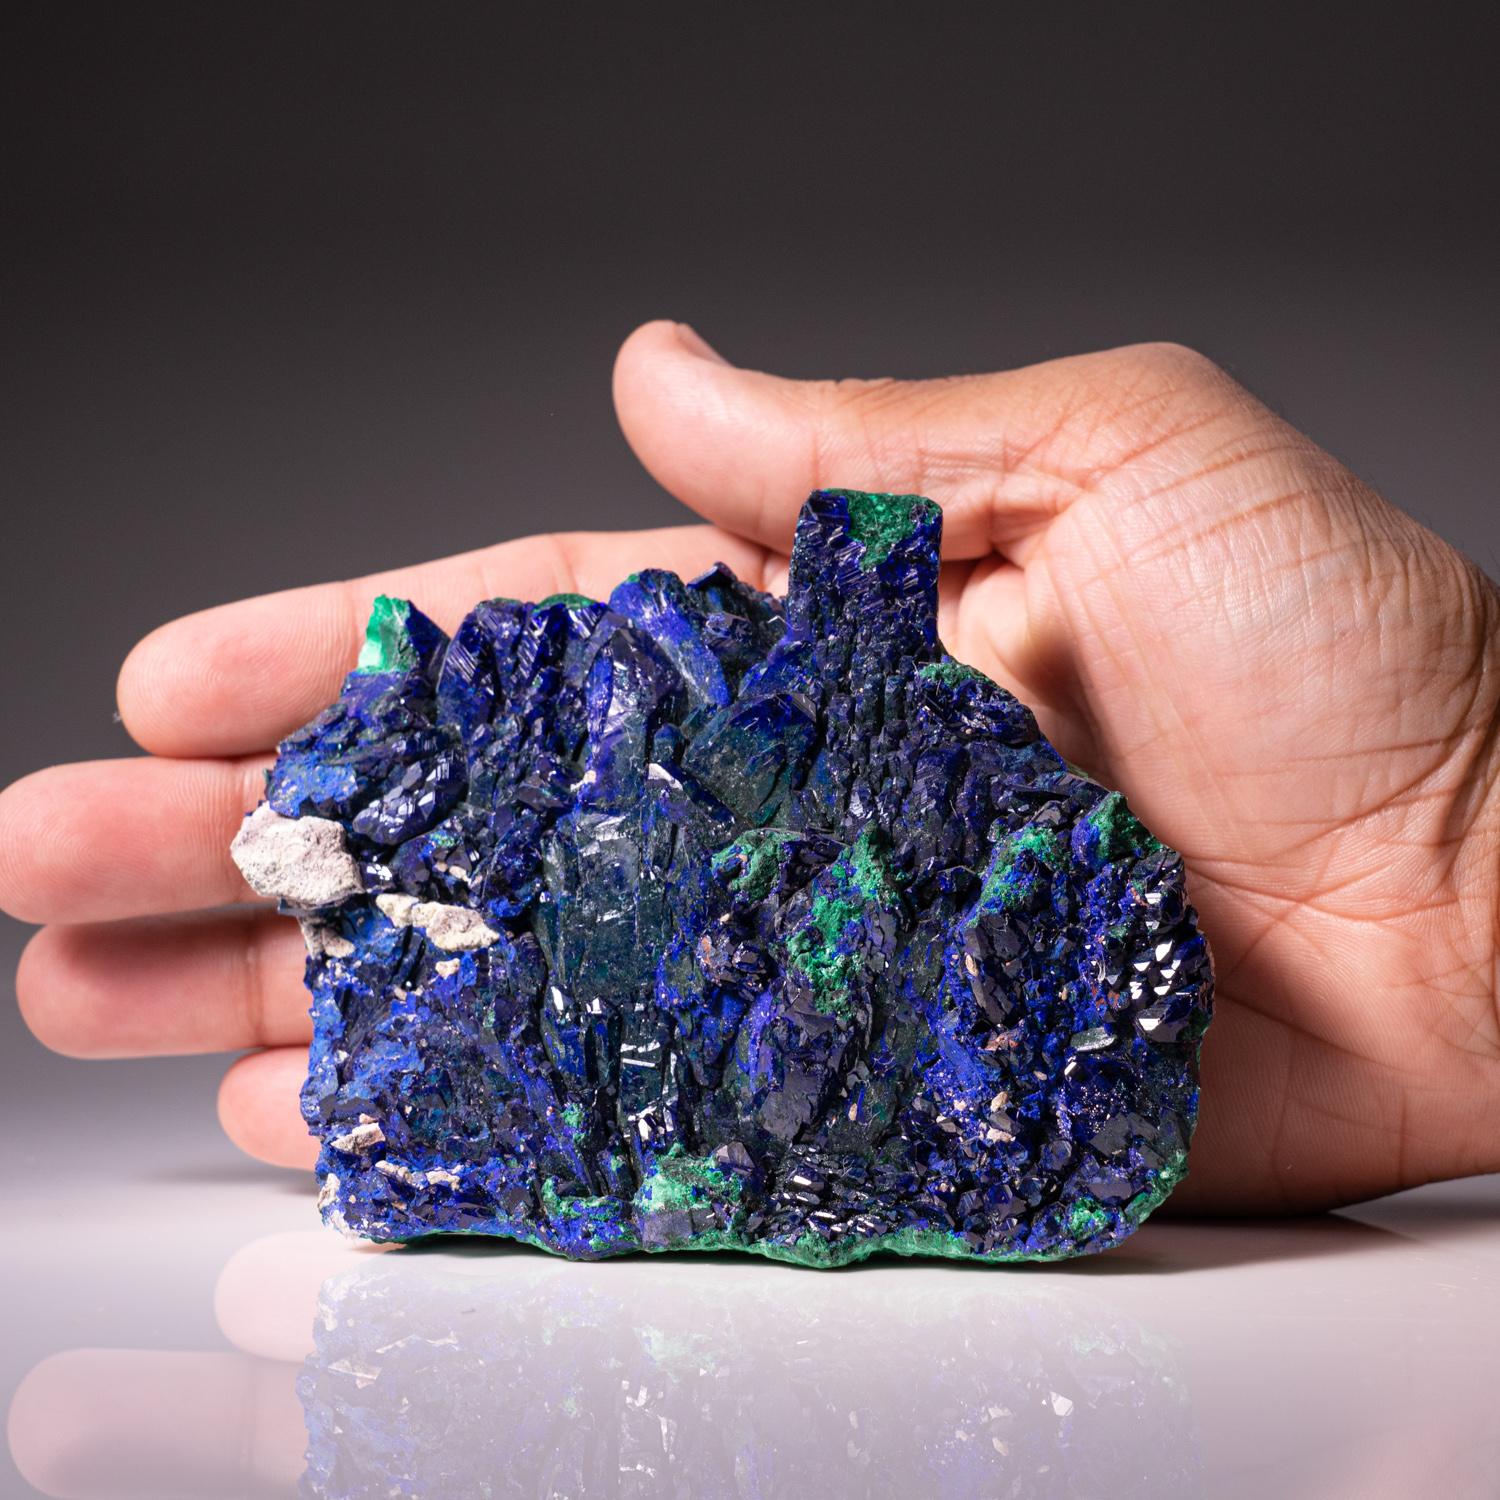 From Tsumeb Mine, Otavi-Bergland District, Oshikoto, Namibia

Rich cluster of lustrous deep royal blue azurite crystals on malachite-duftite-calcite matrix. All of the azurite crystals are highly lustrous with complex crystal development.

